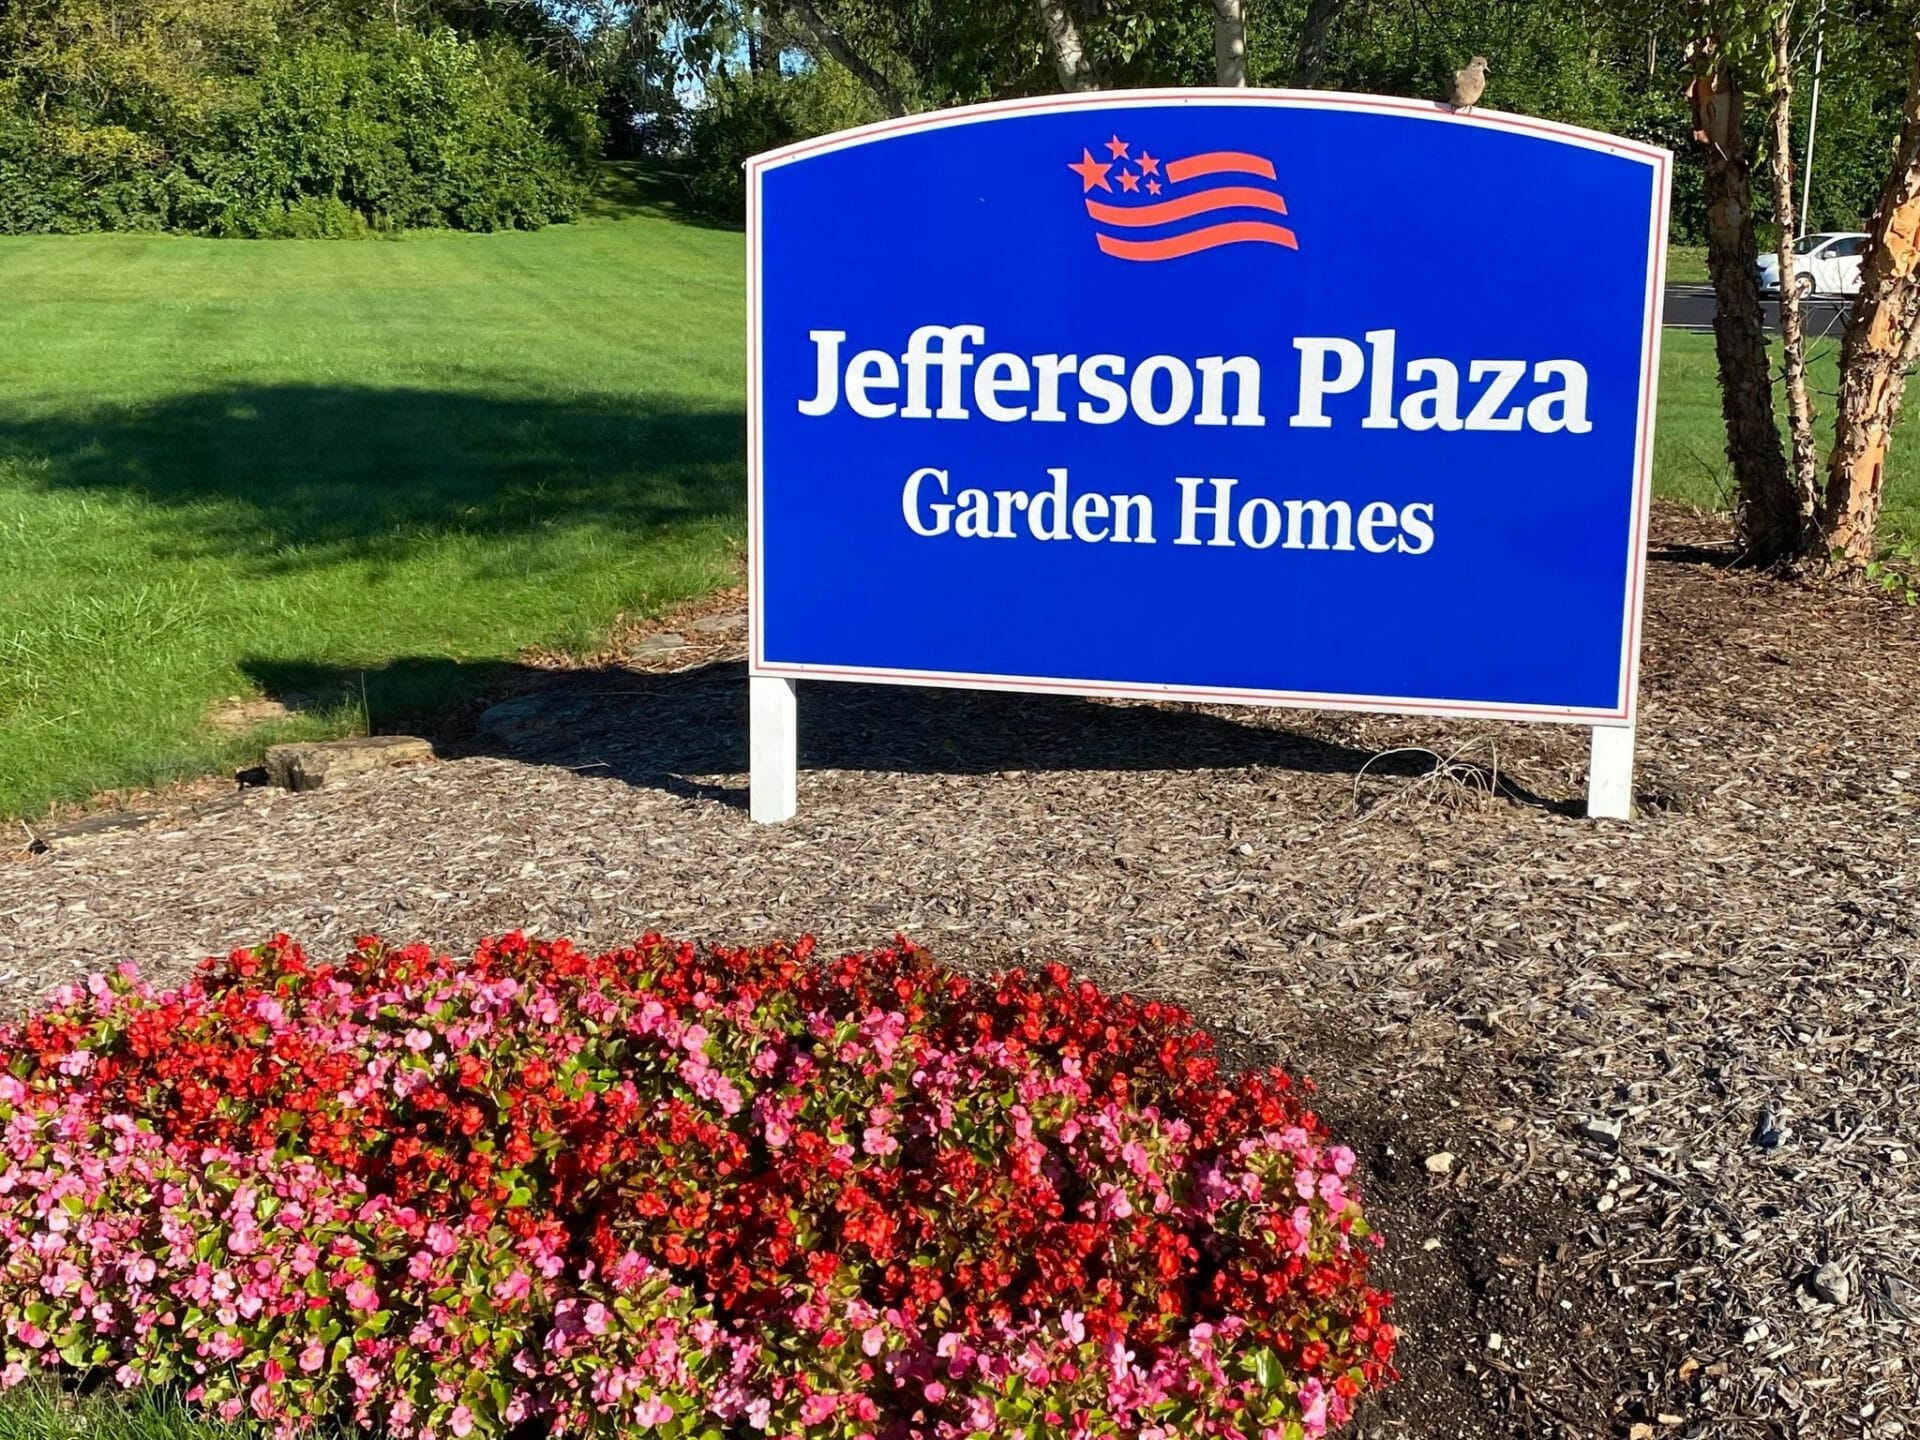 <span  class="uc_style_uc_tiles_grid_image_elementor_uc_items_attribute_title" style="color:#000000;">Jefferson Plaza sign with flowers </span>